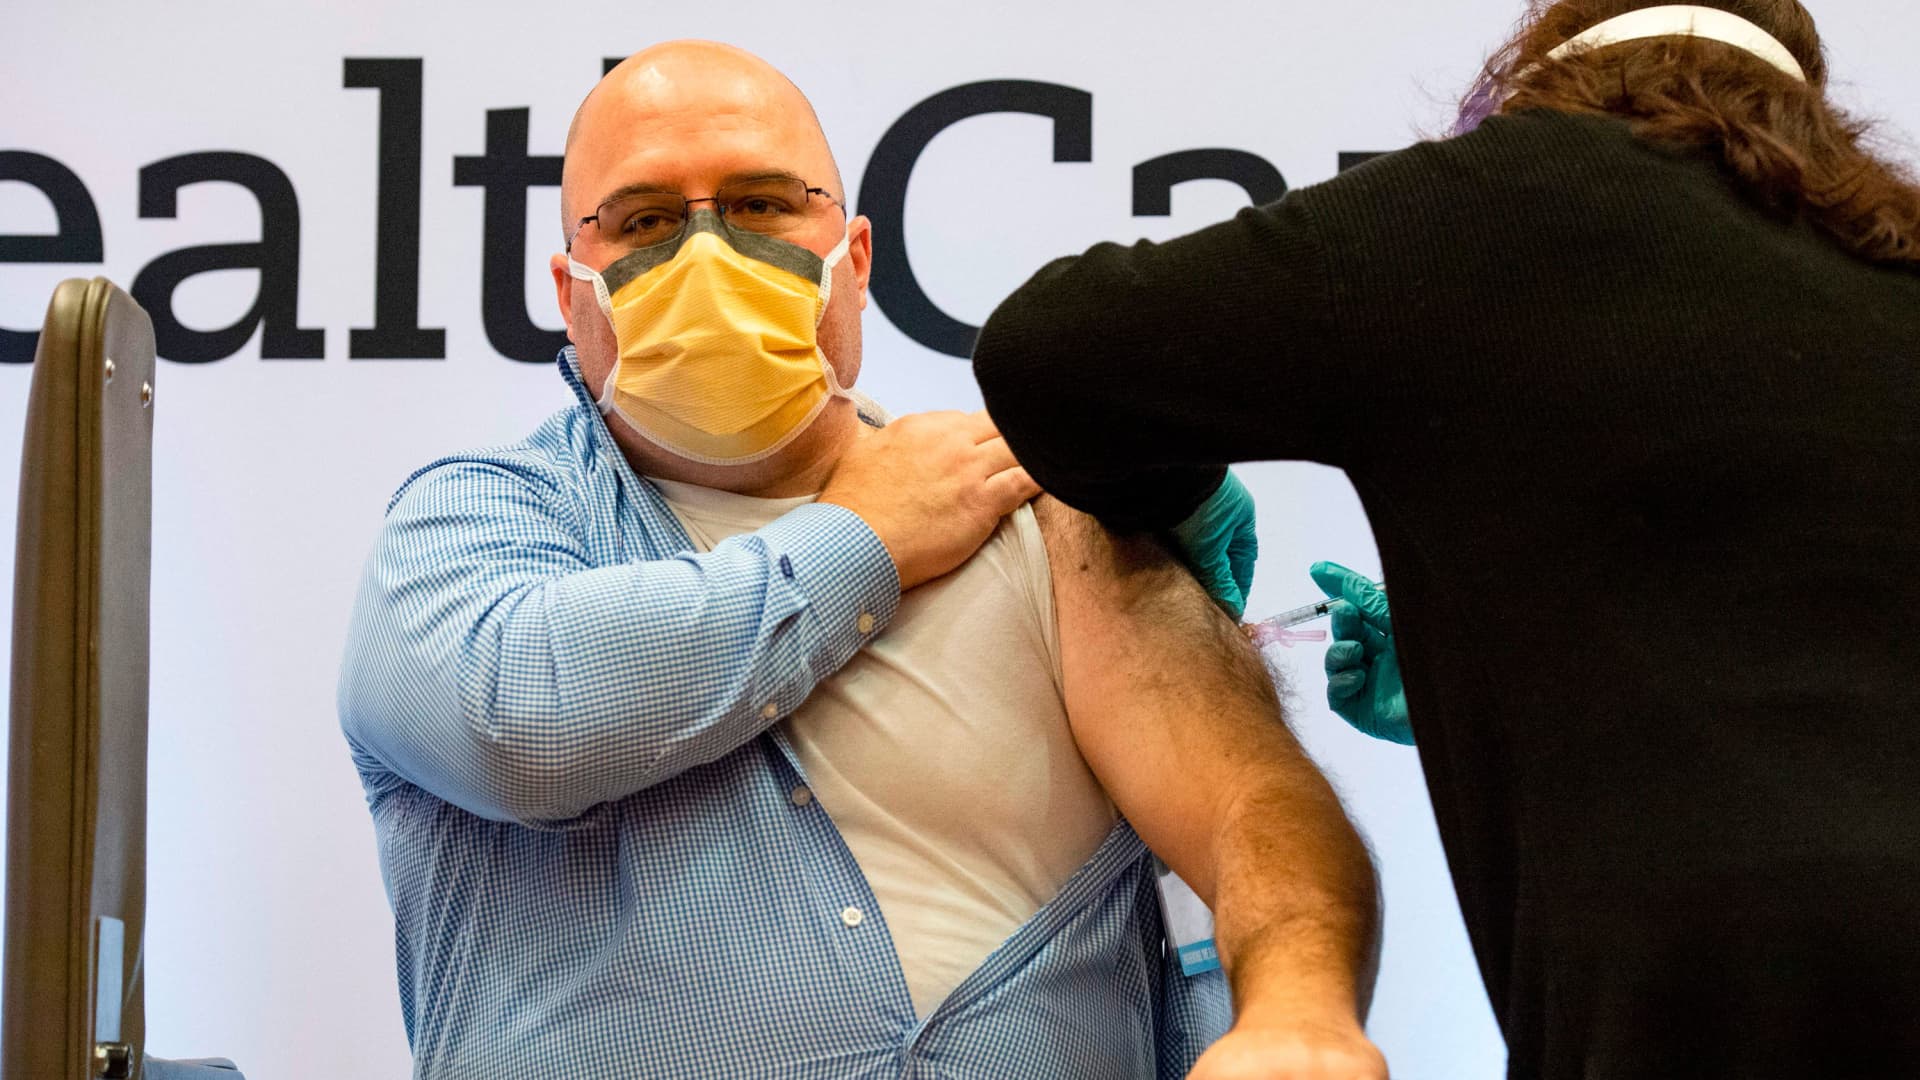 Michael Girard recieves the Covid-19 vaccine with the first batch of Moderna's vaccine at Hartford hospital in Hartford, Connecticut on December 21, 2020. arrival of the vaccine.